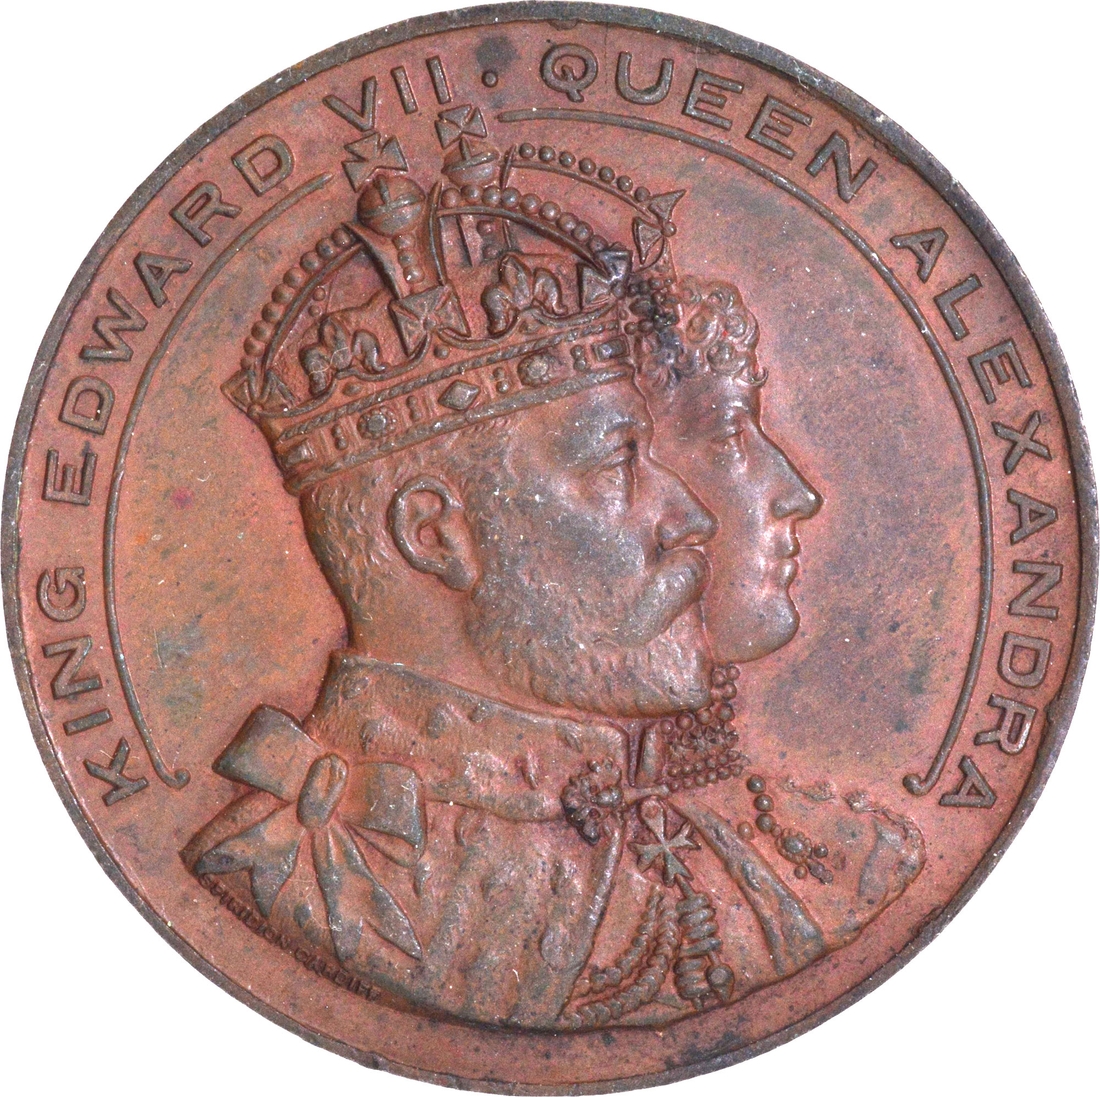 Commemorative Medallion of A Royal Visit to Cardiff of Queen Alexandra.